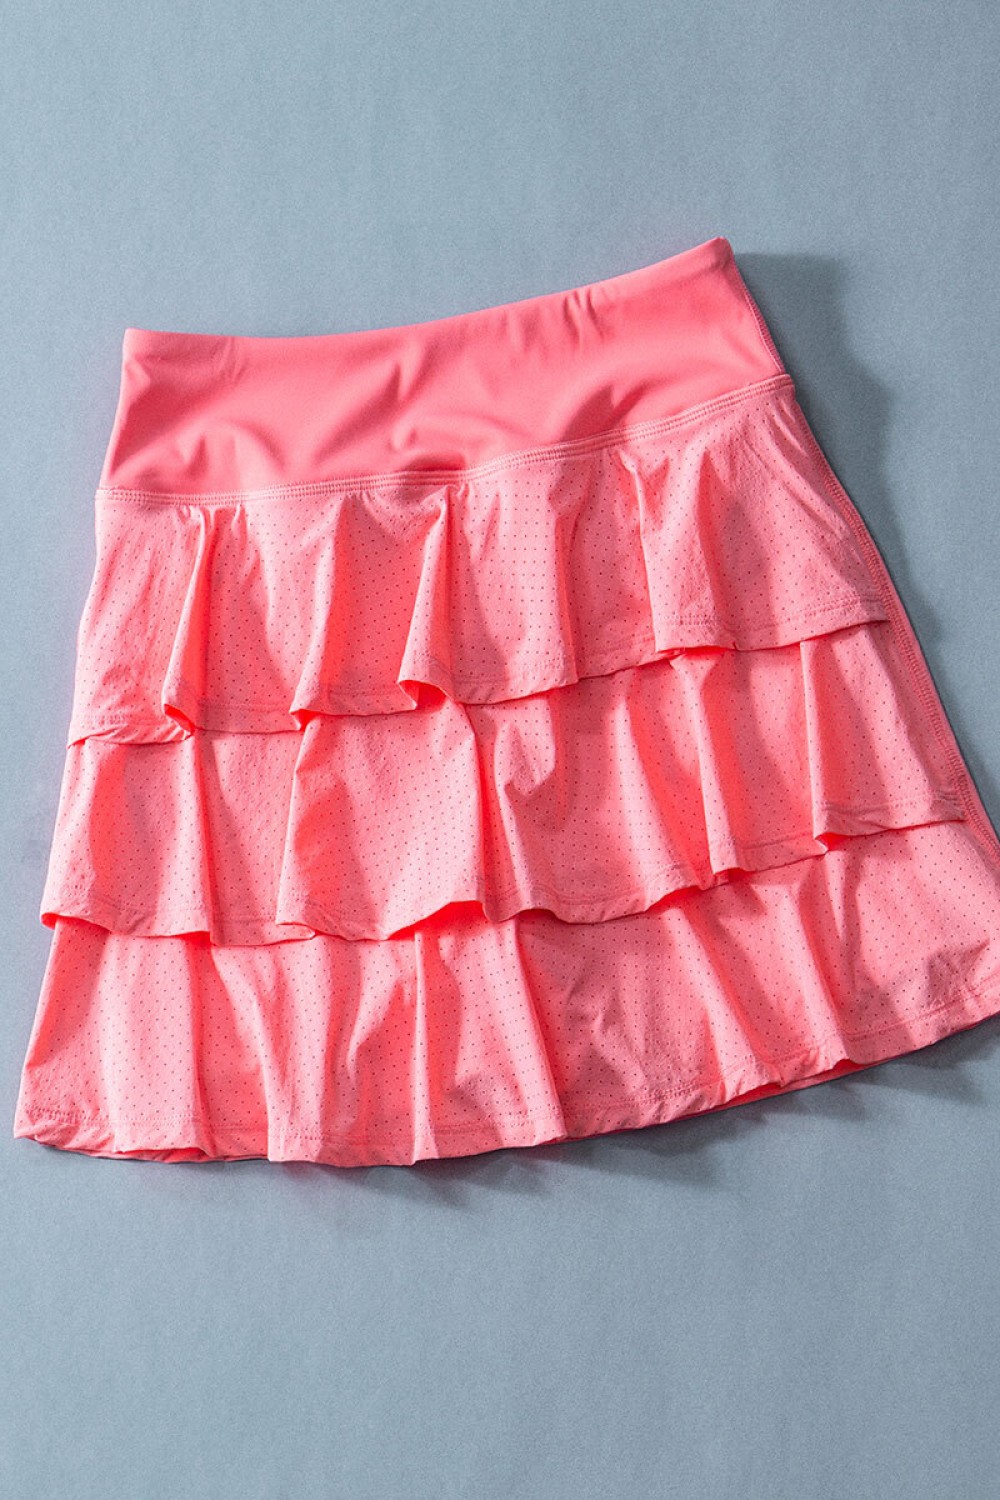 ATHELETIC TIERED RUFFLE TENNIS SKIRT SHORTS